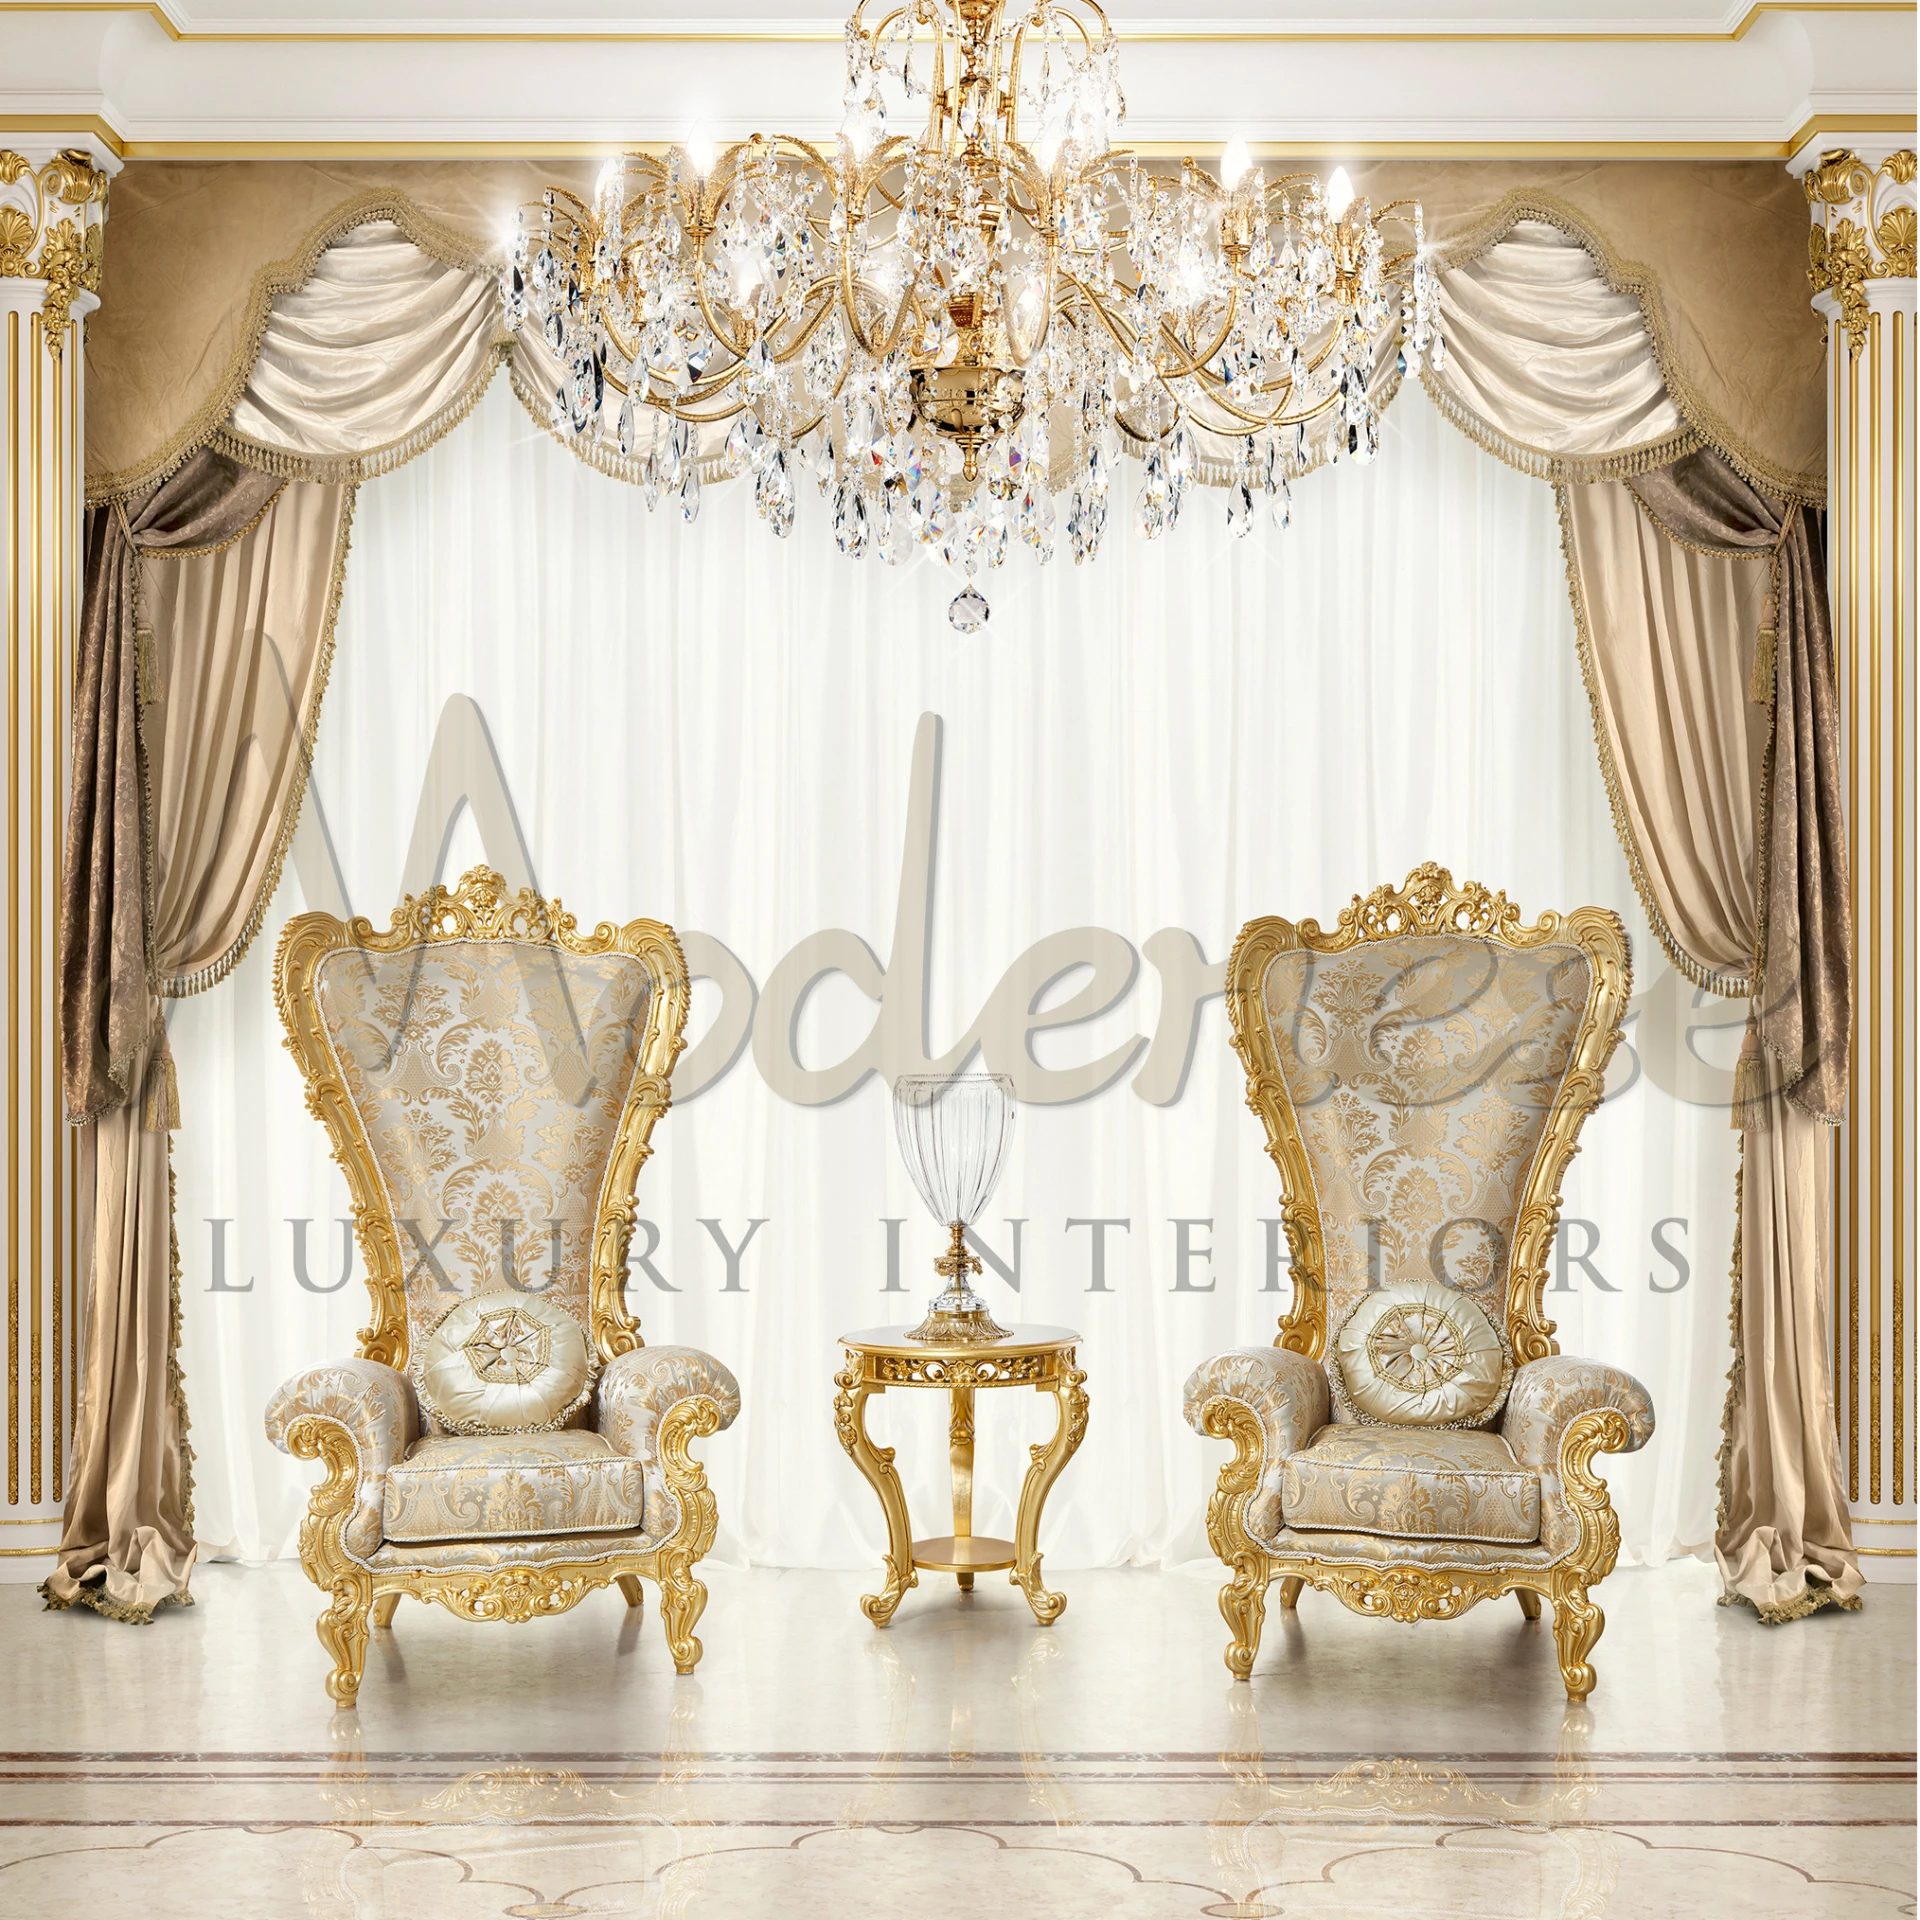  Luxurious Royal Throne Armchair, enriched with gold leaf carvings and sophisticated finishes, embodying regal elegance.
